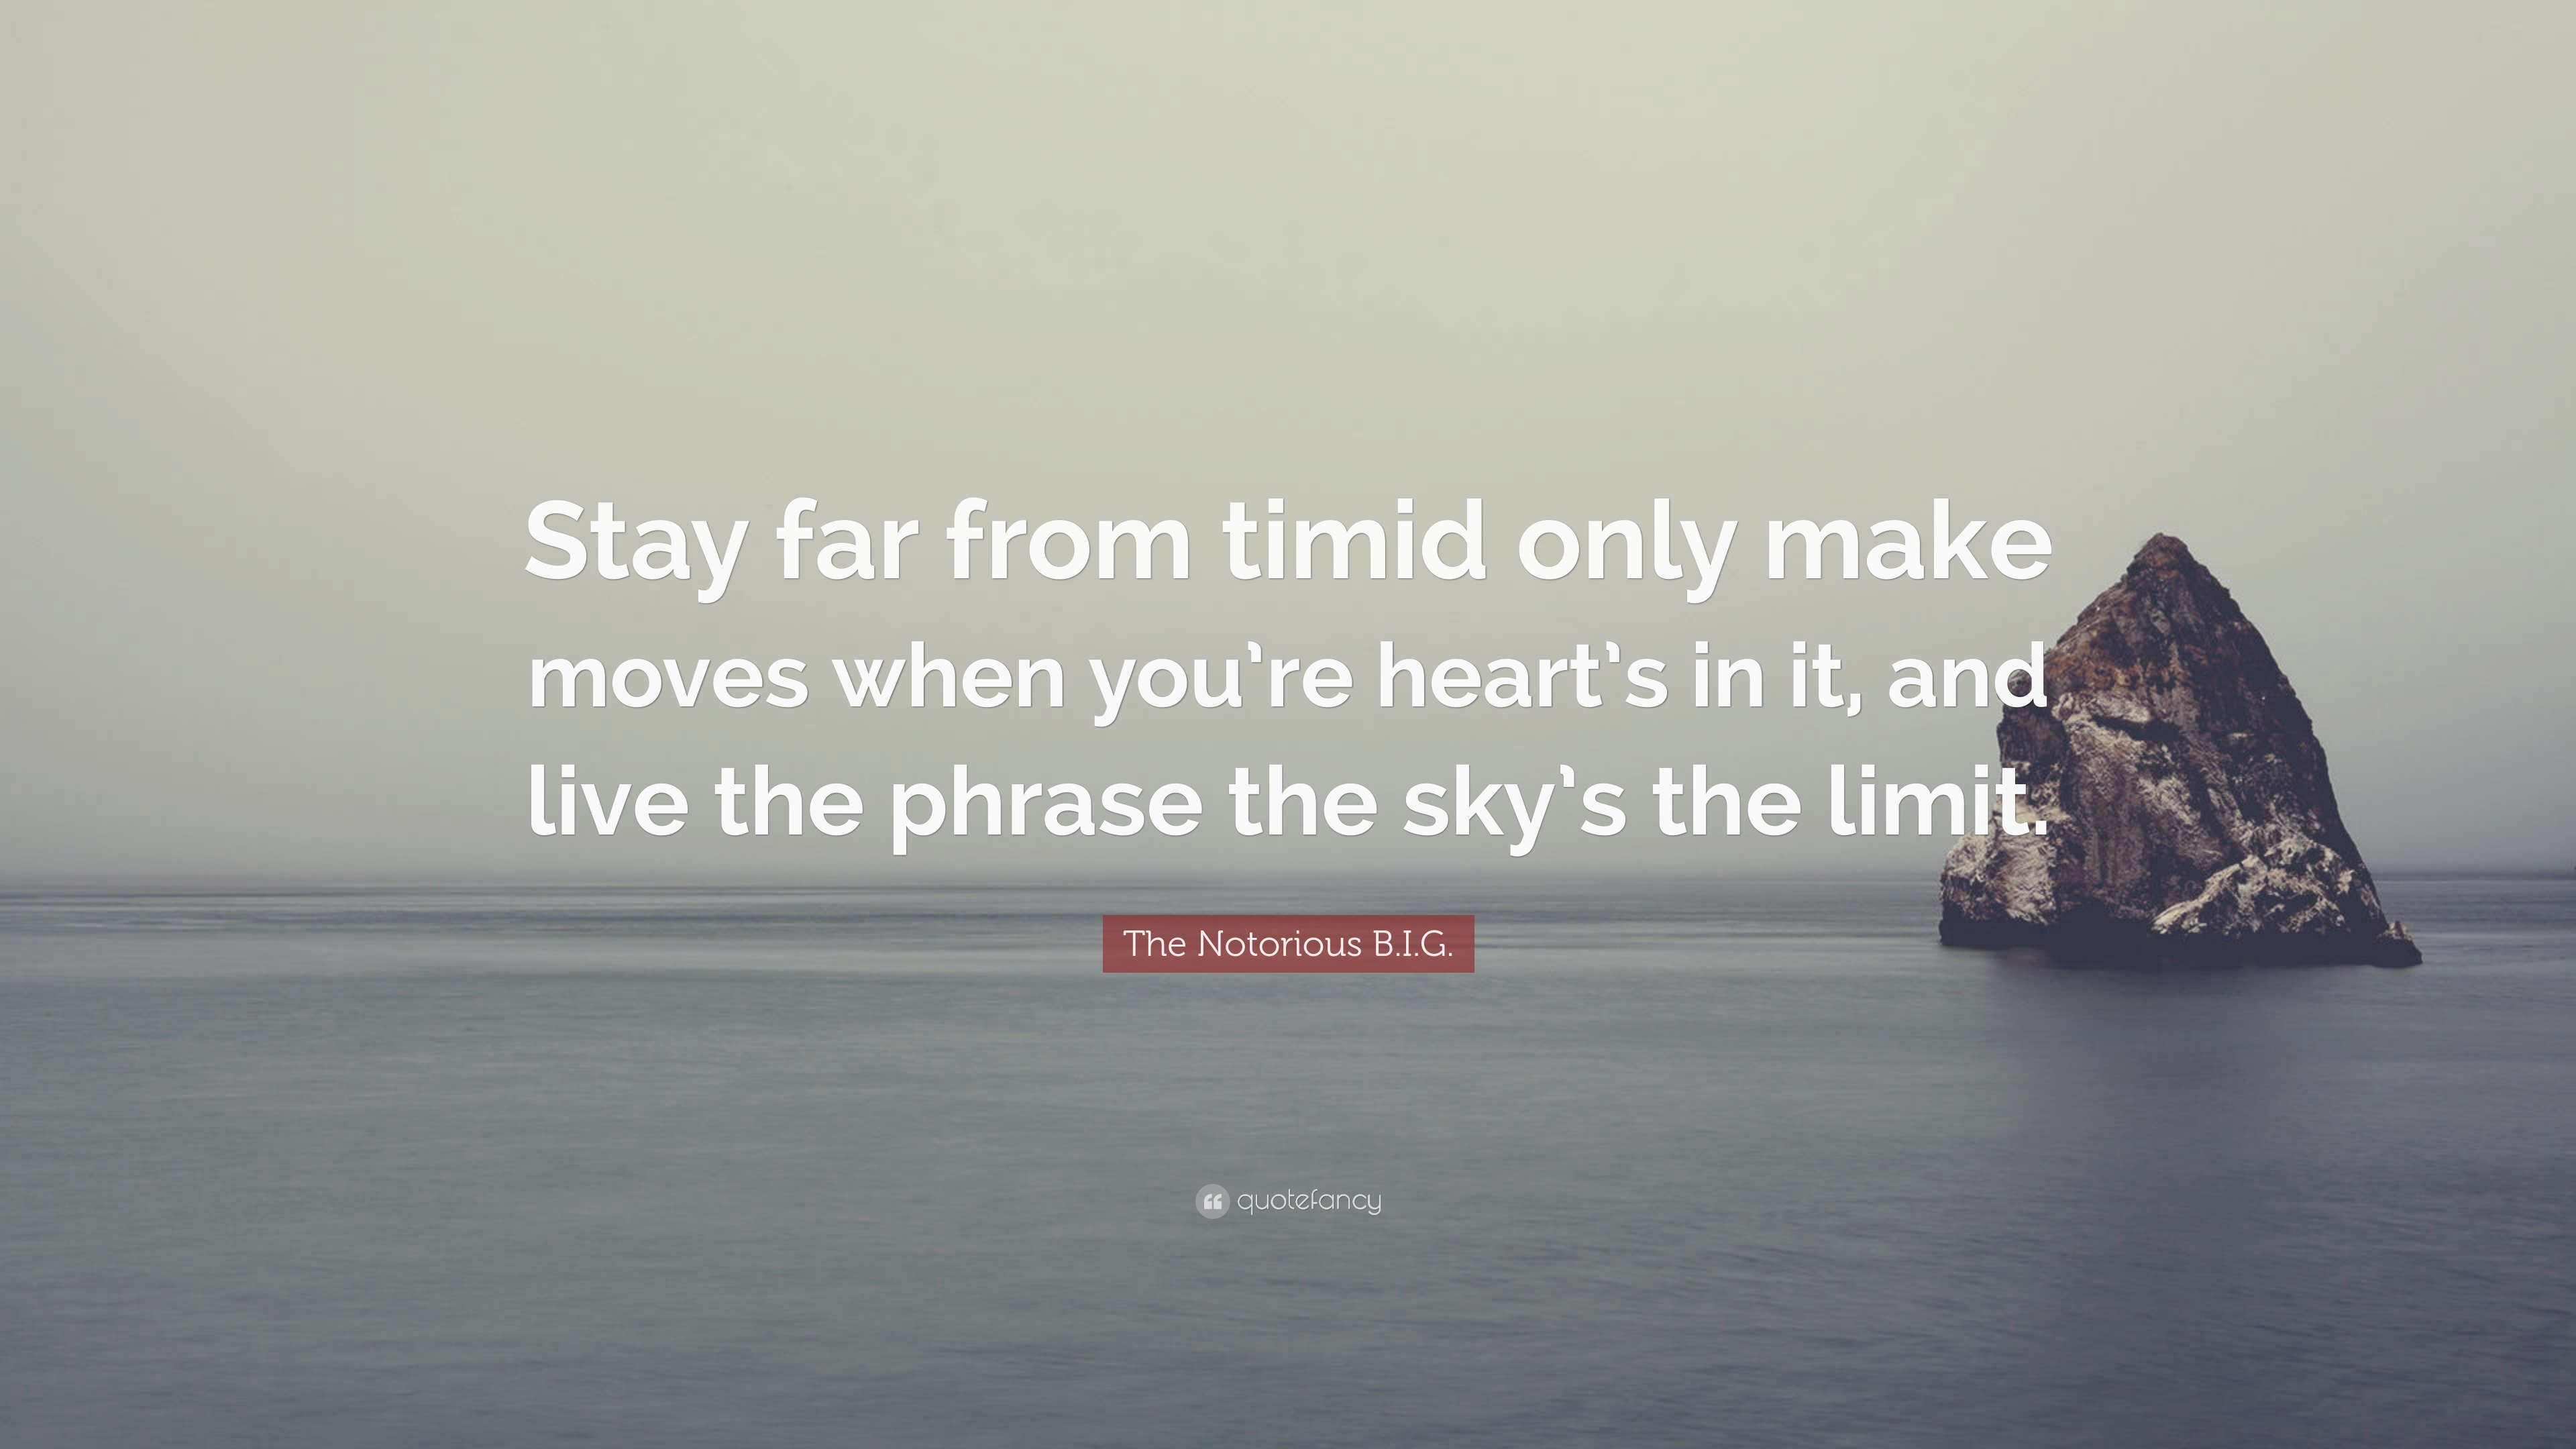 The Notorious B.I.G. Quote: “Stay far from timid only make moves when